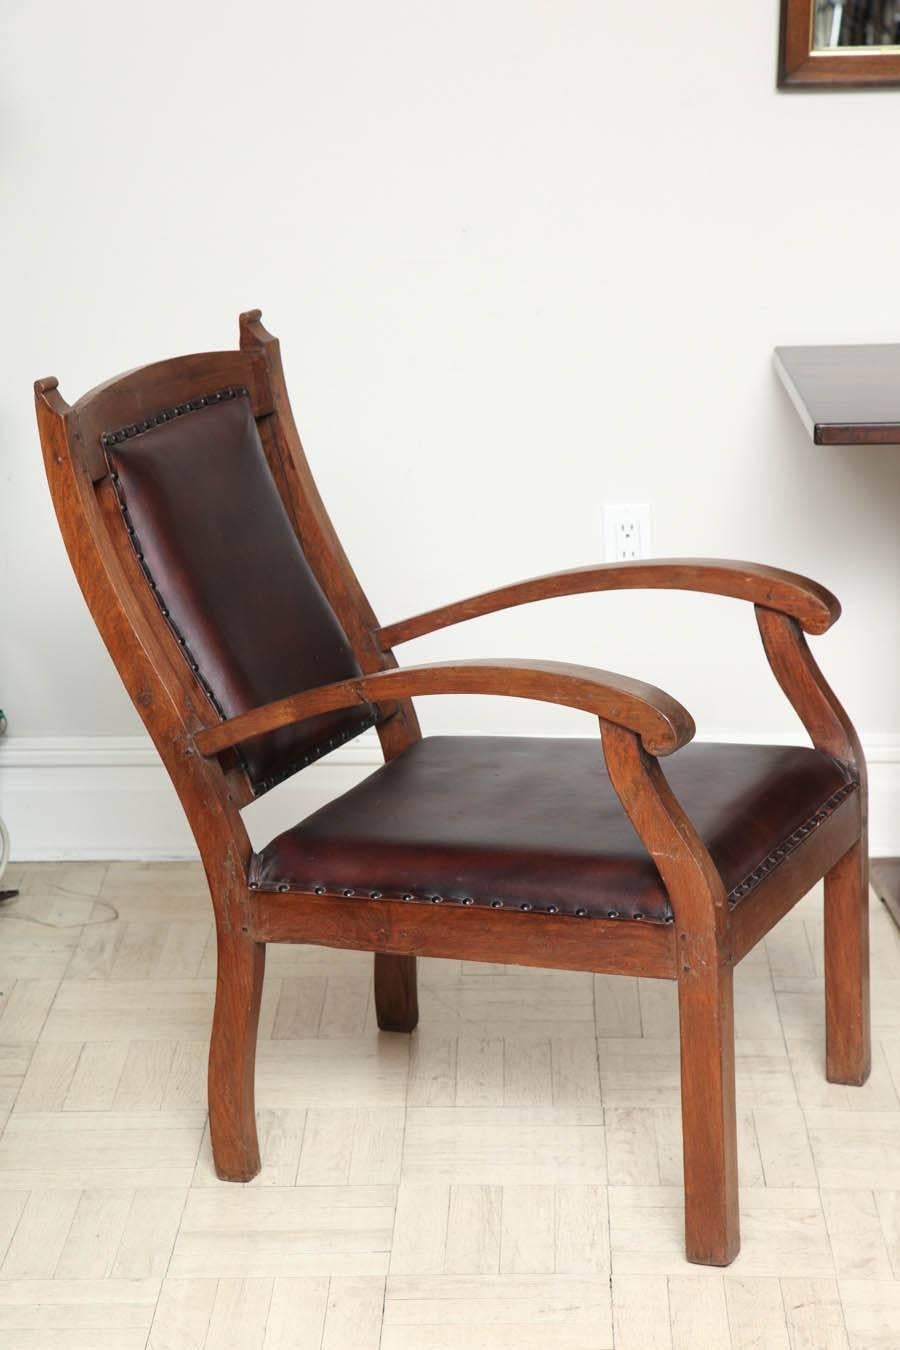 Pair of late 19th century teak armchairs, leather upholstery India, circa 1890.